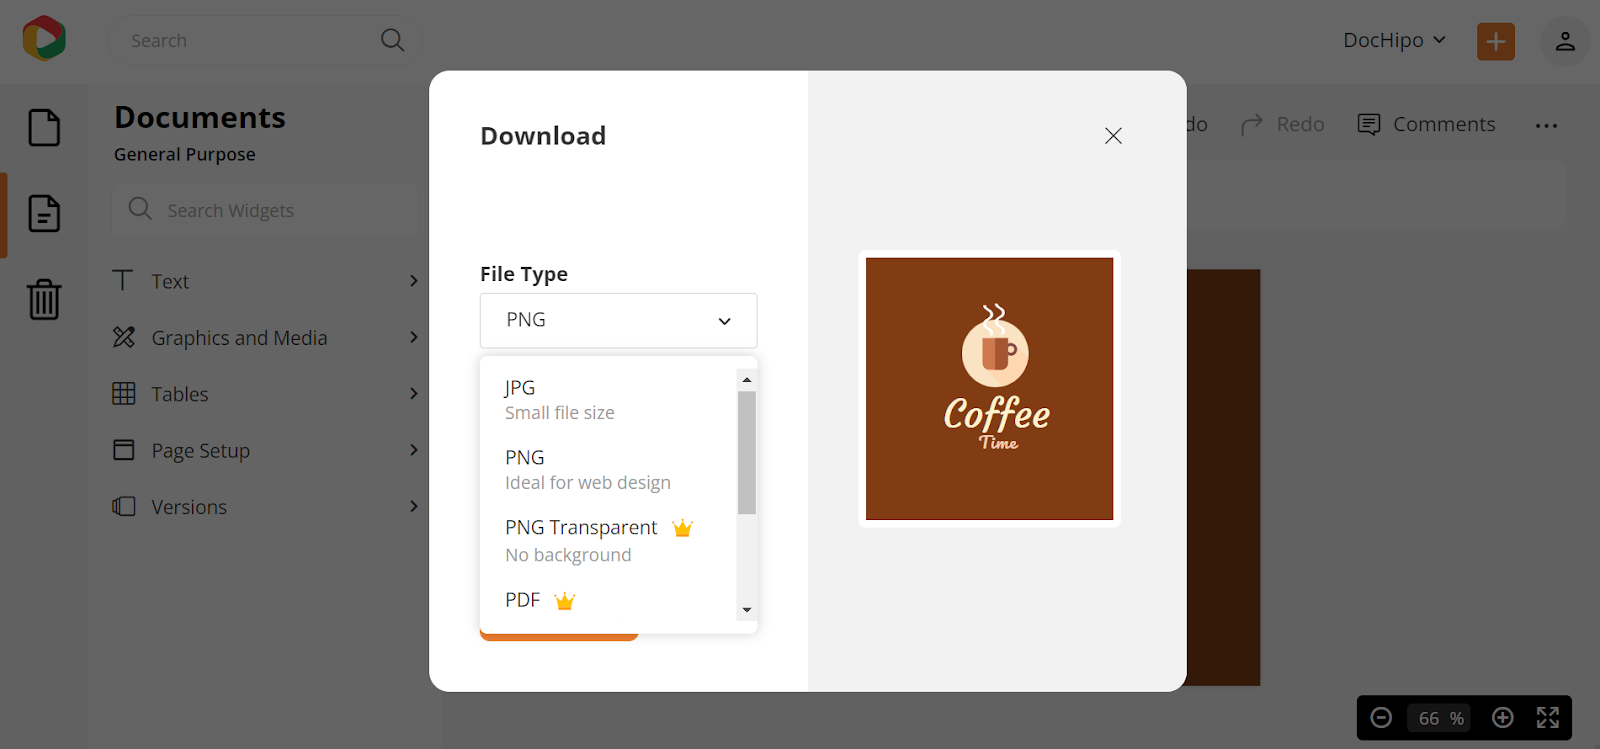 Download file types in DocHipo